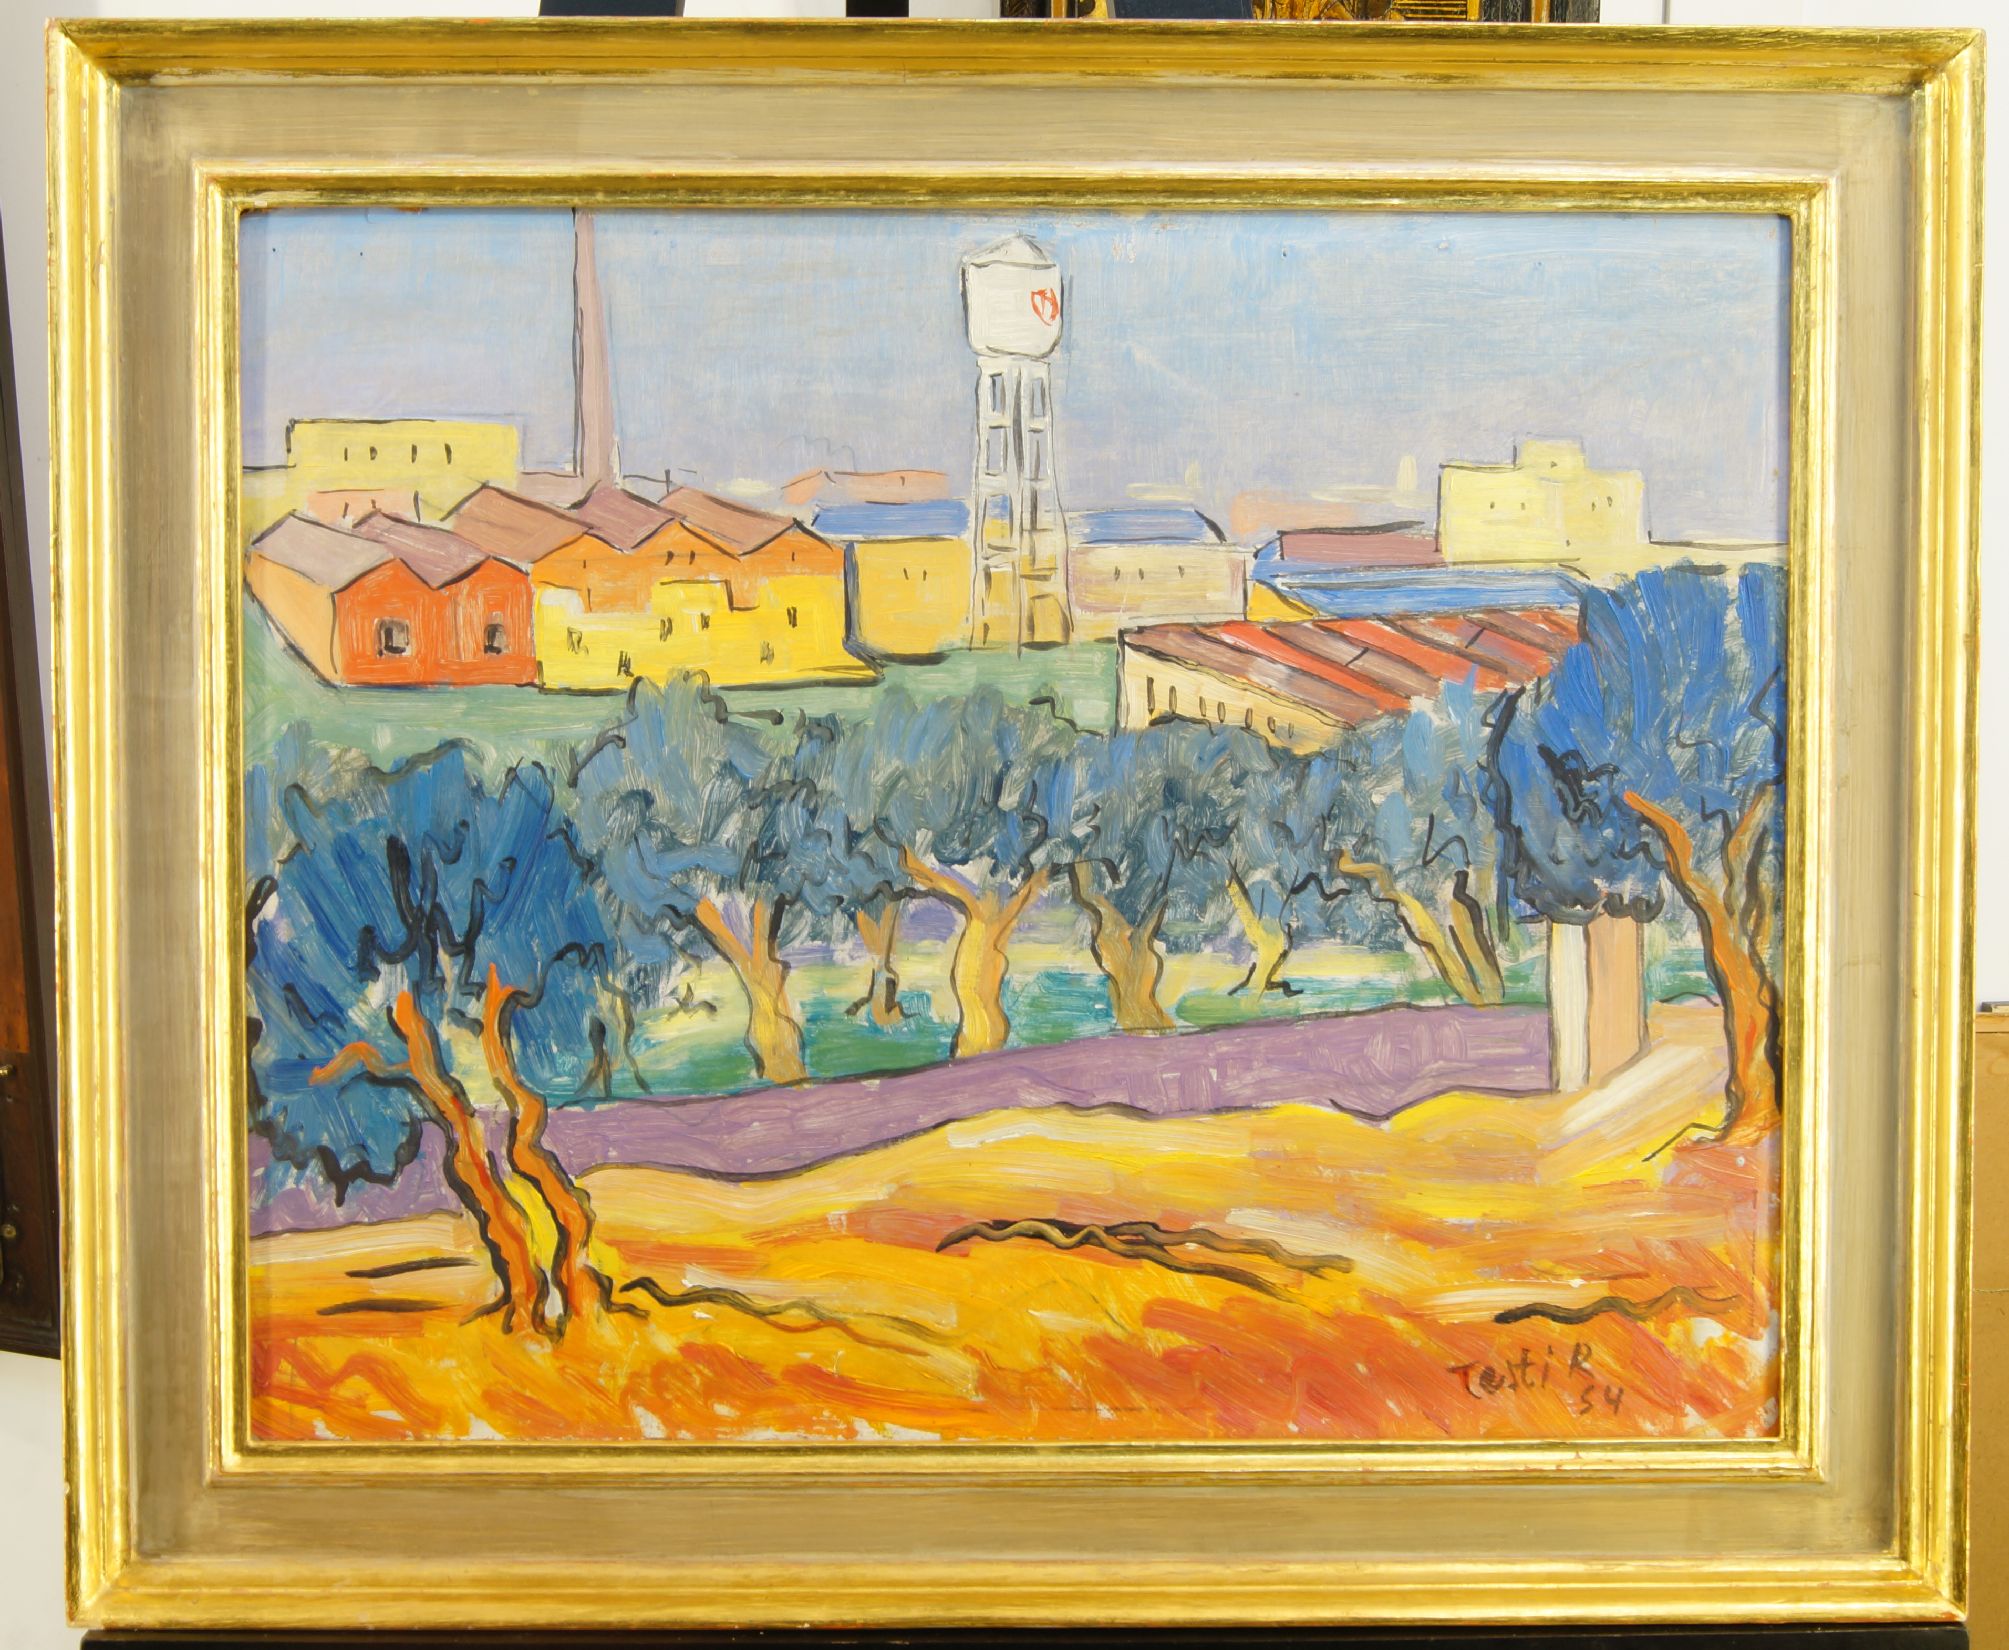 Testi, Italian school, mid-20th century- View of a factory; oil on board, signed and dated 'Testi - Image 2 of 3